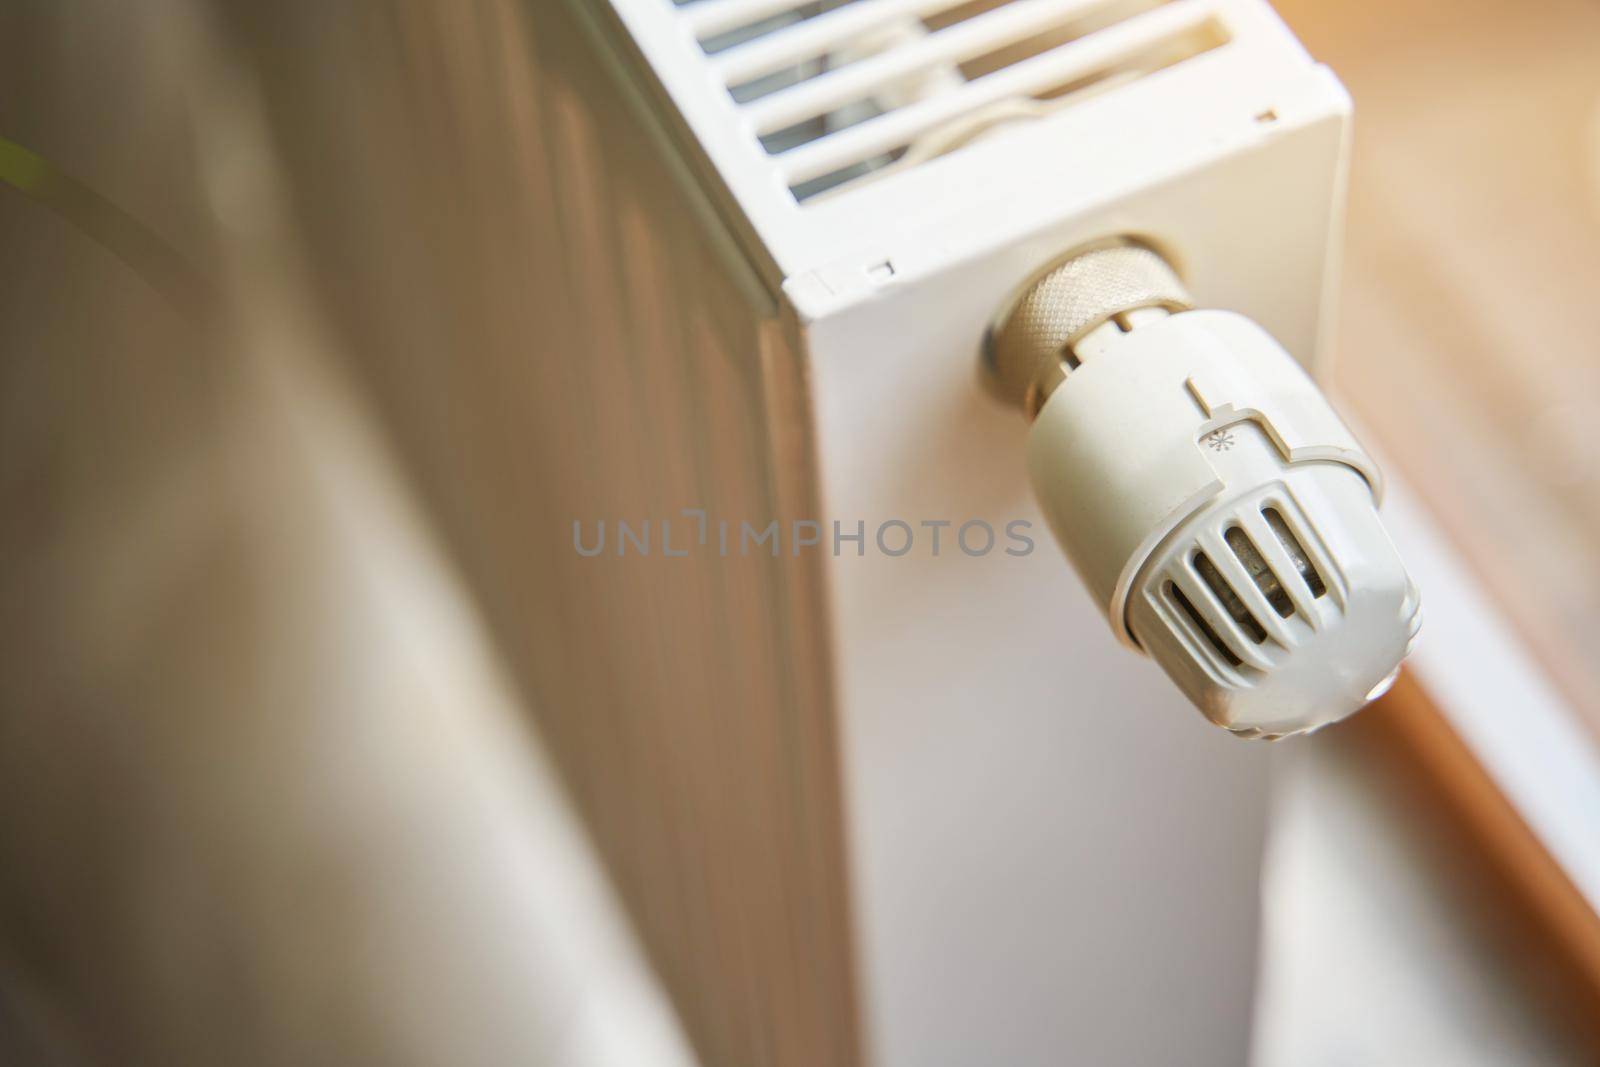 Radiator in the apartment. White heated battery. Thermostat head of a heating radiator in an apartment, office.